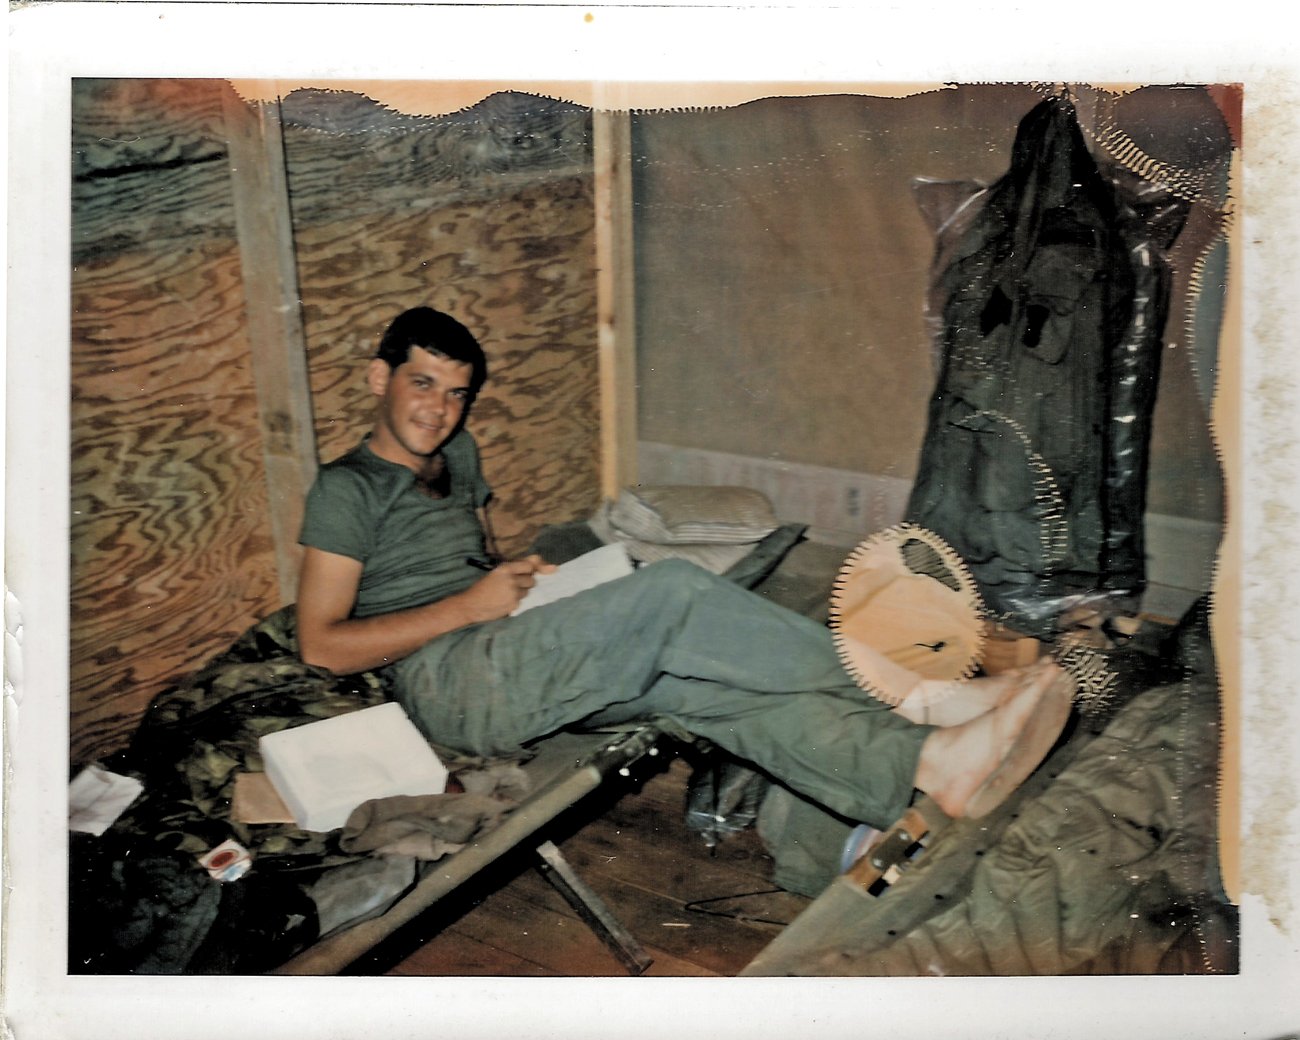 US Soldier in Vietnam reading a book 